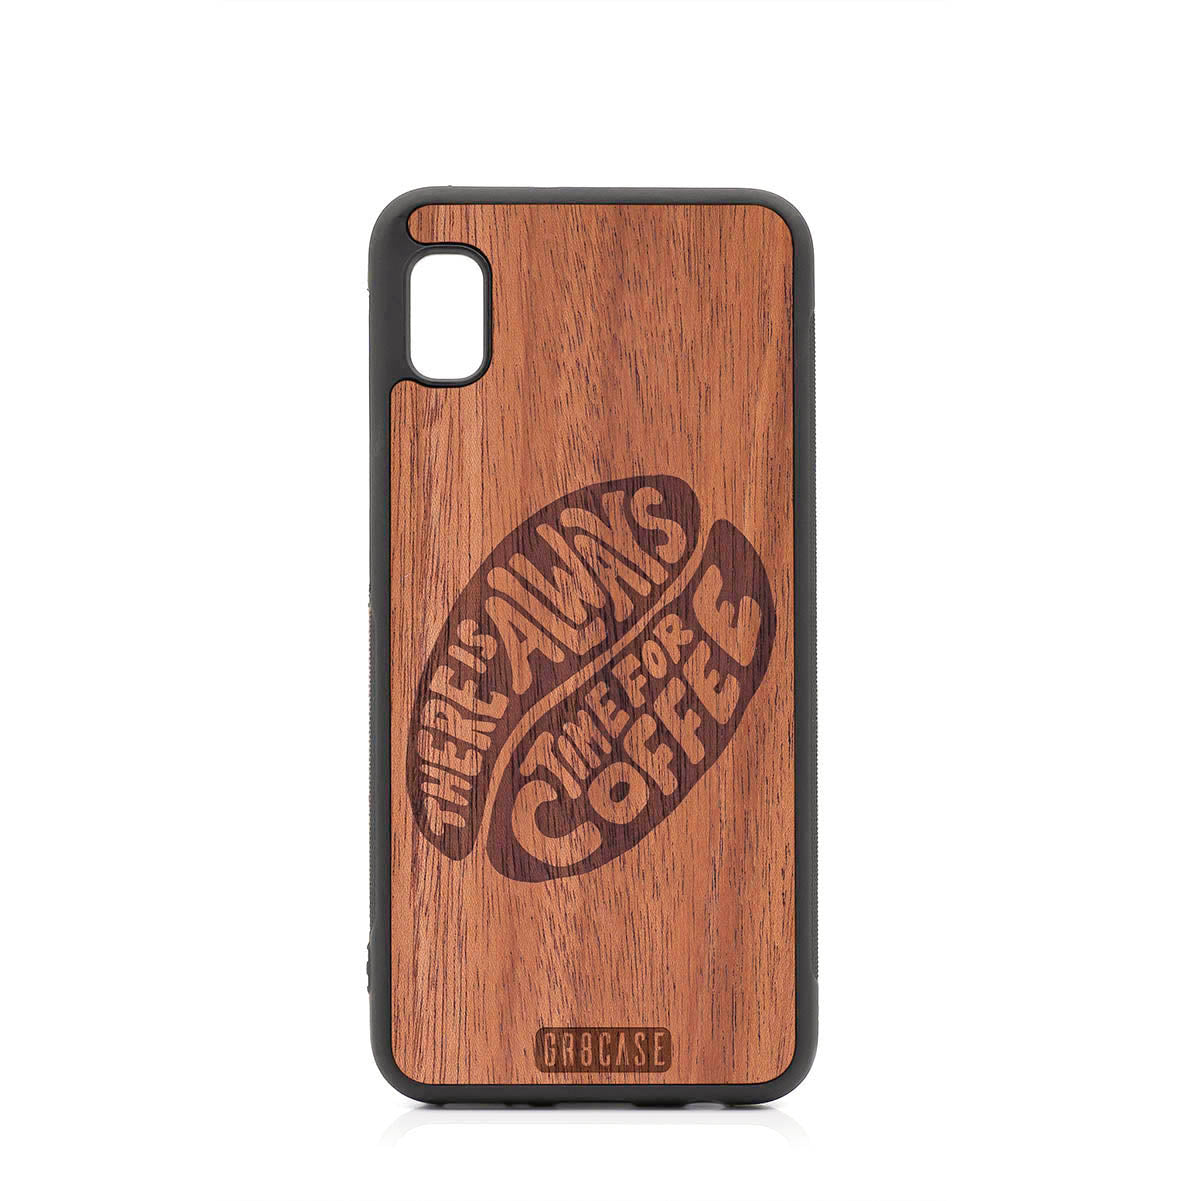 There Is Always Time For Coffee Design Wood Case For Samsung Galaxy A10E